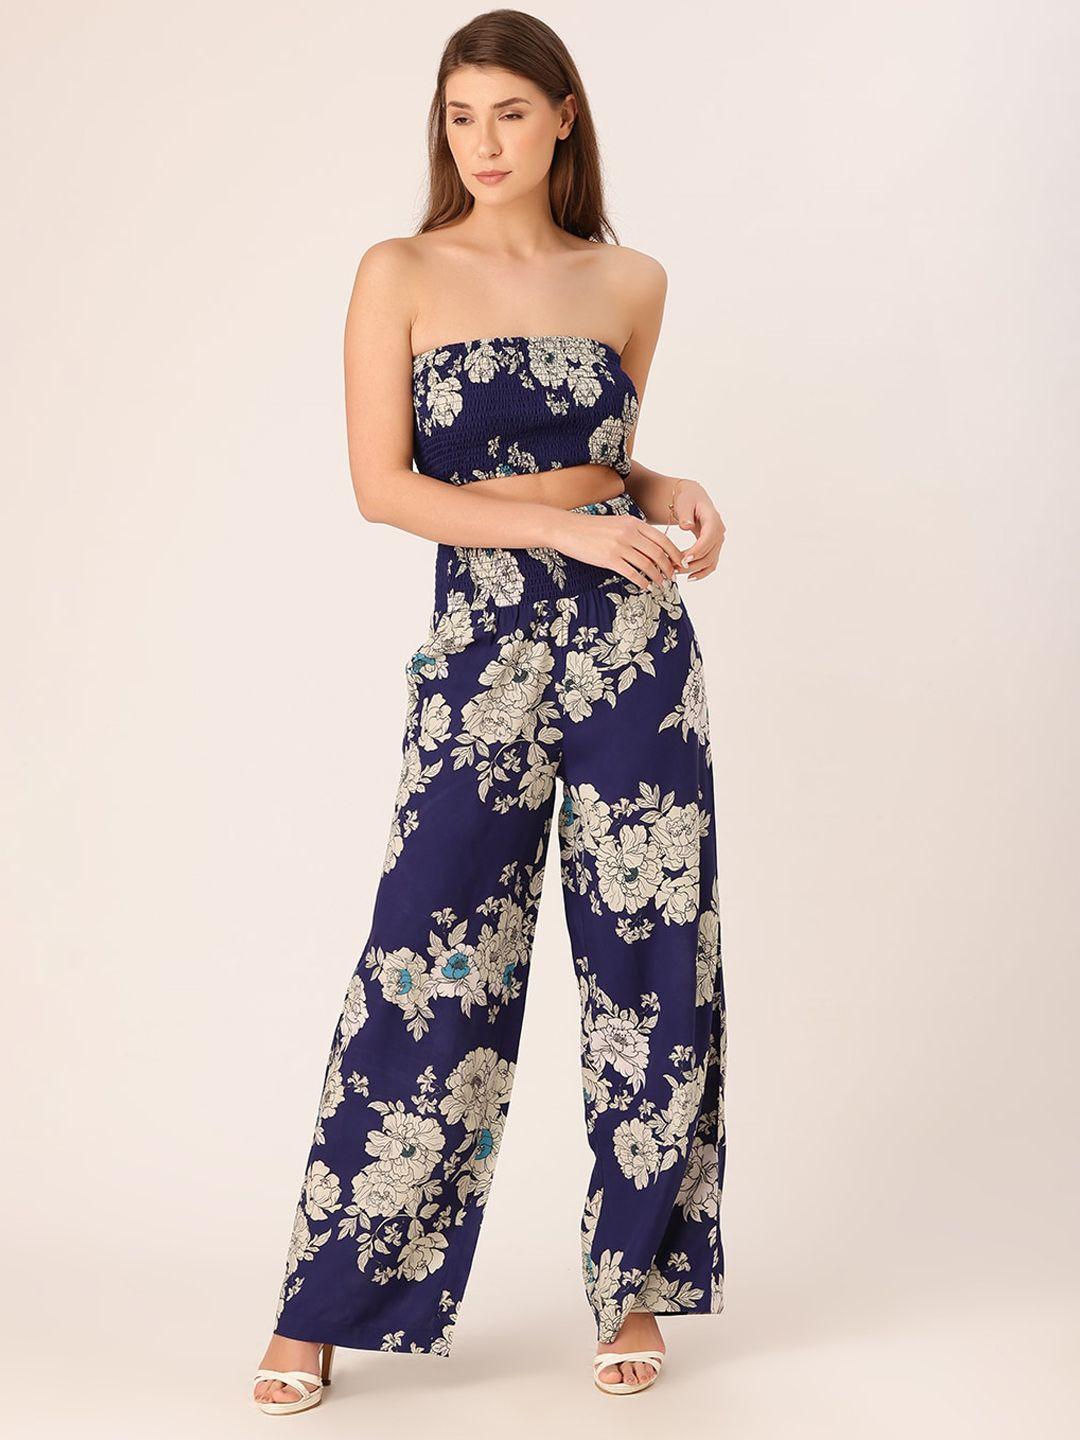 dressberry floral printed strapless co-ord set